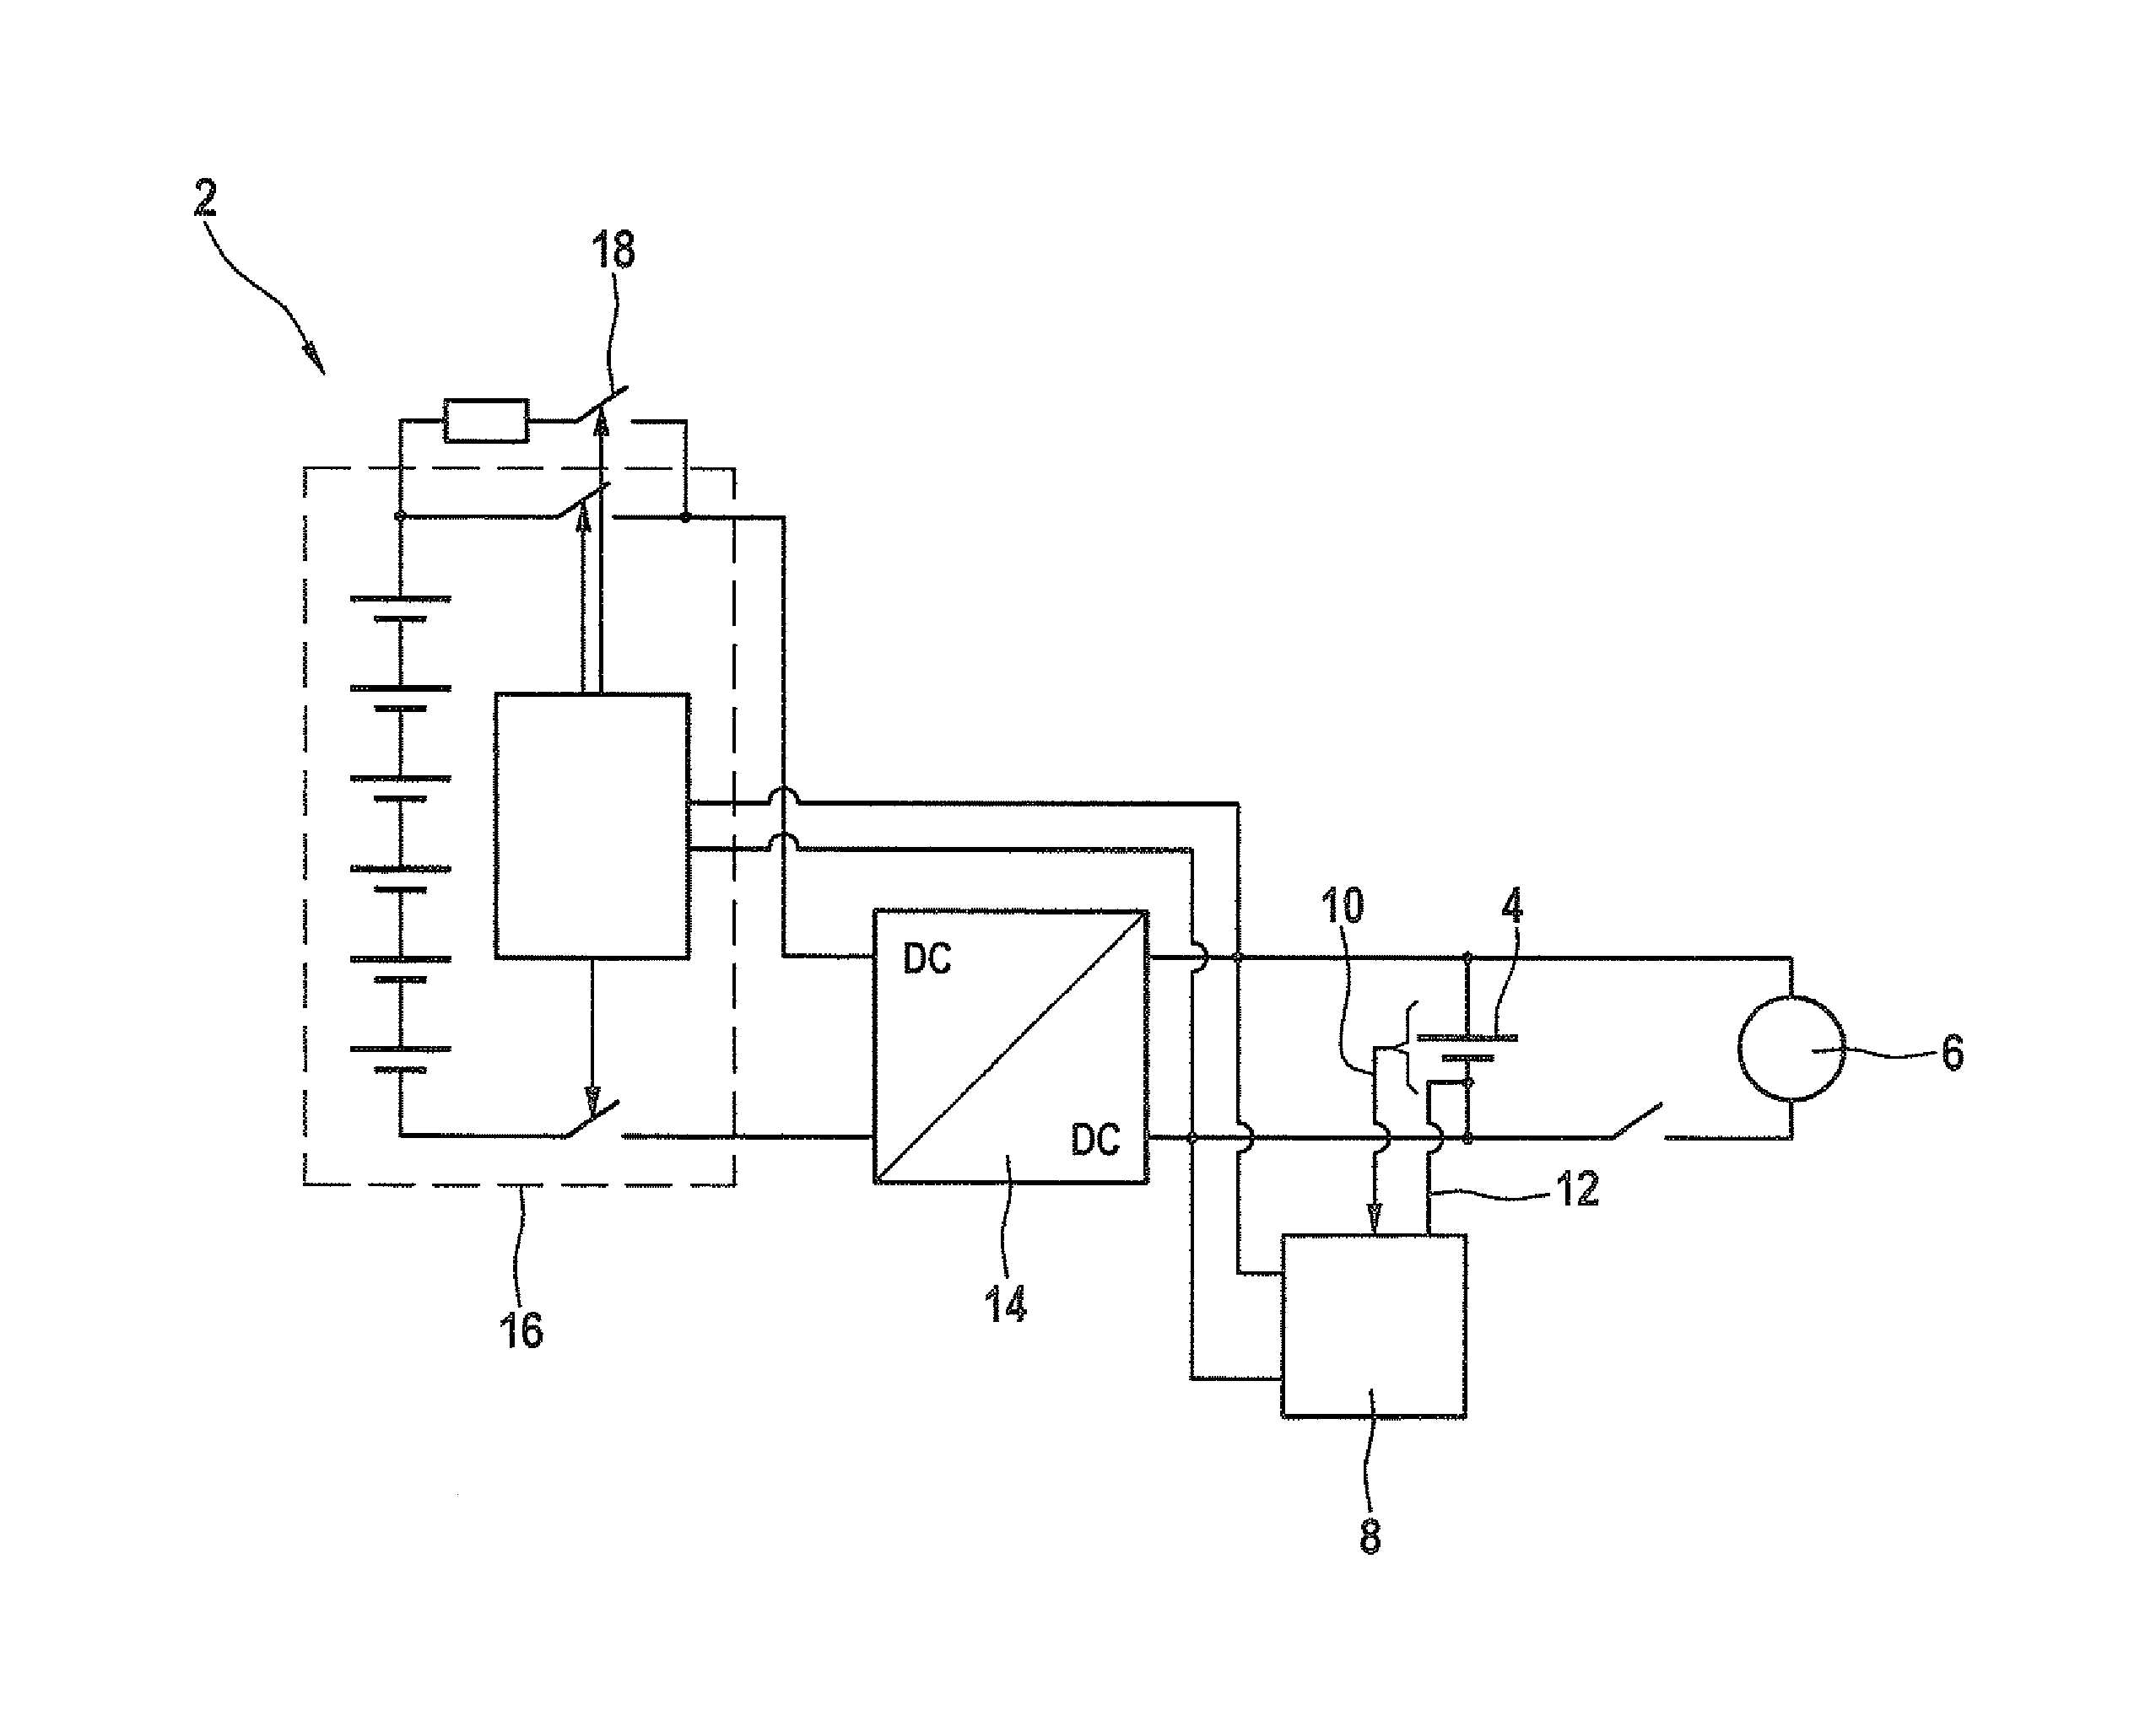 Circuit for operating an auxiliary unit for starting internal combustion engines